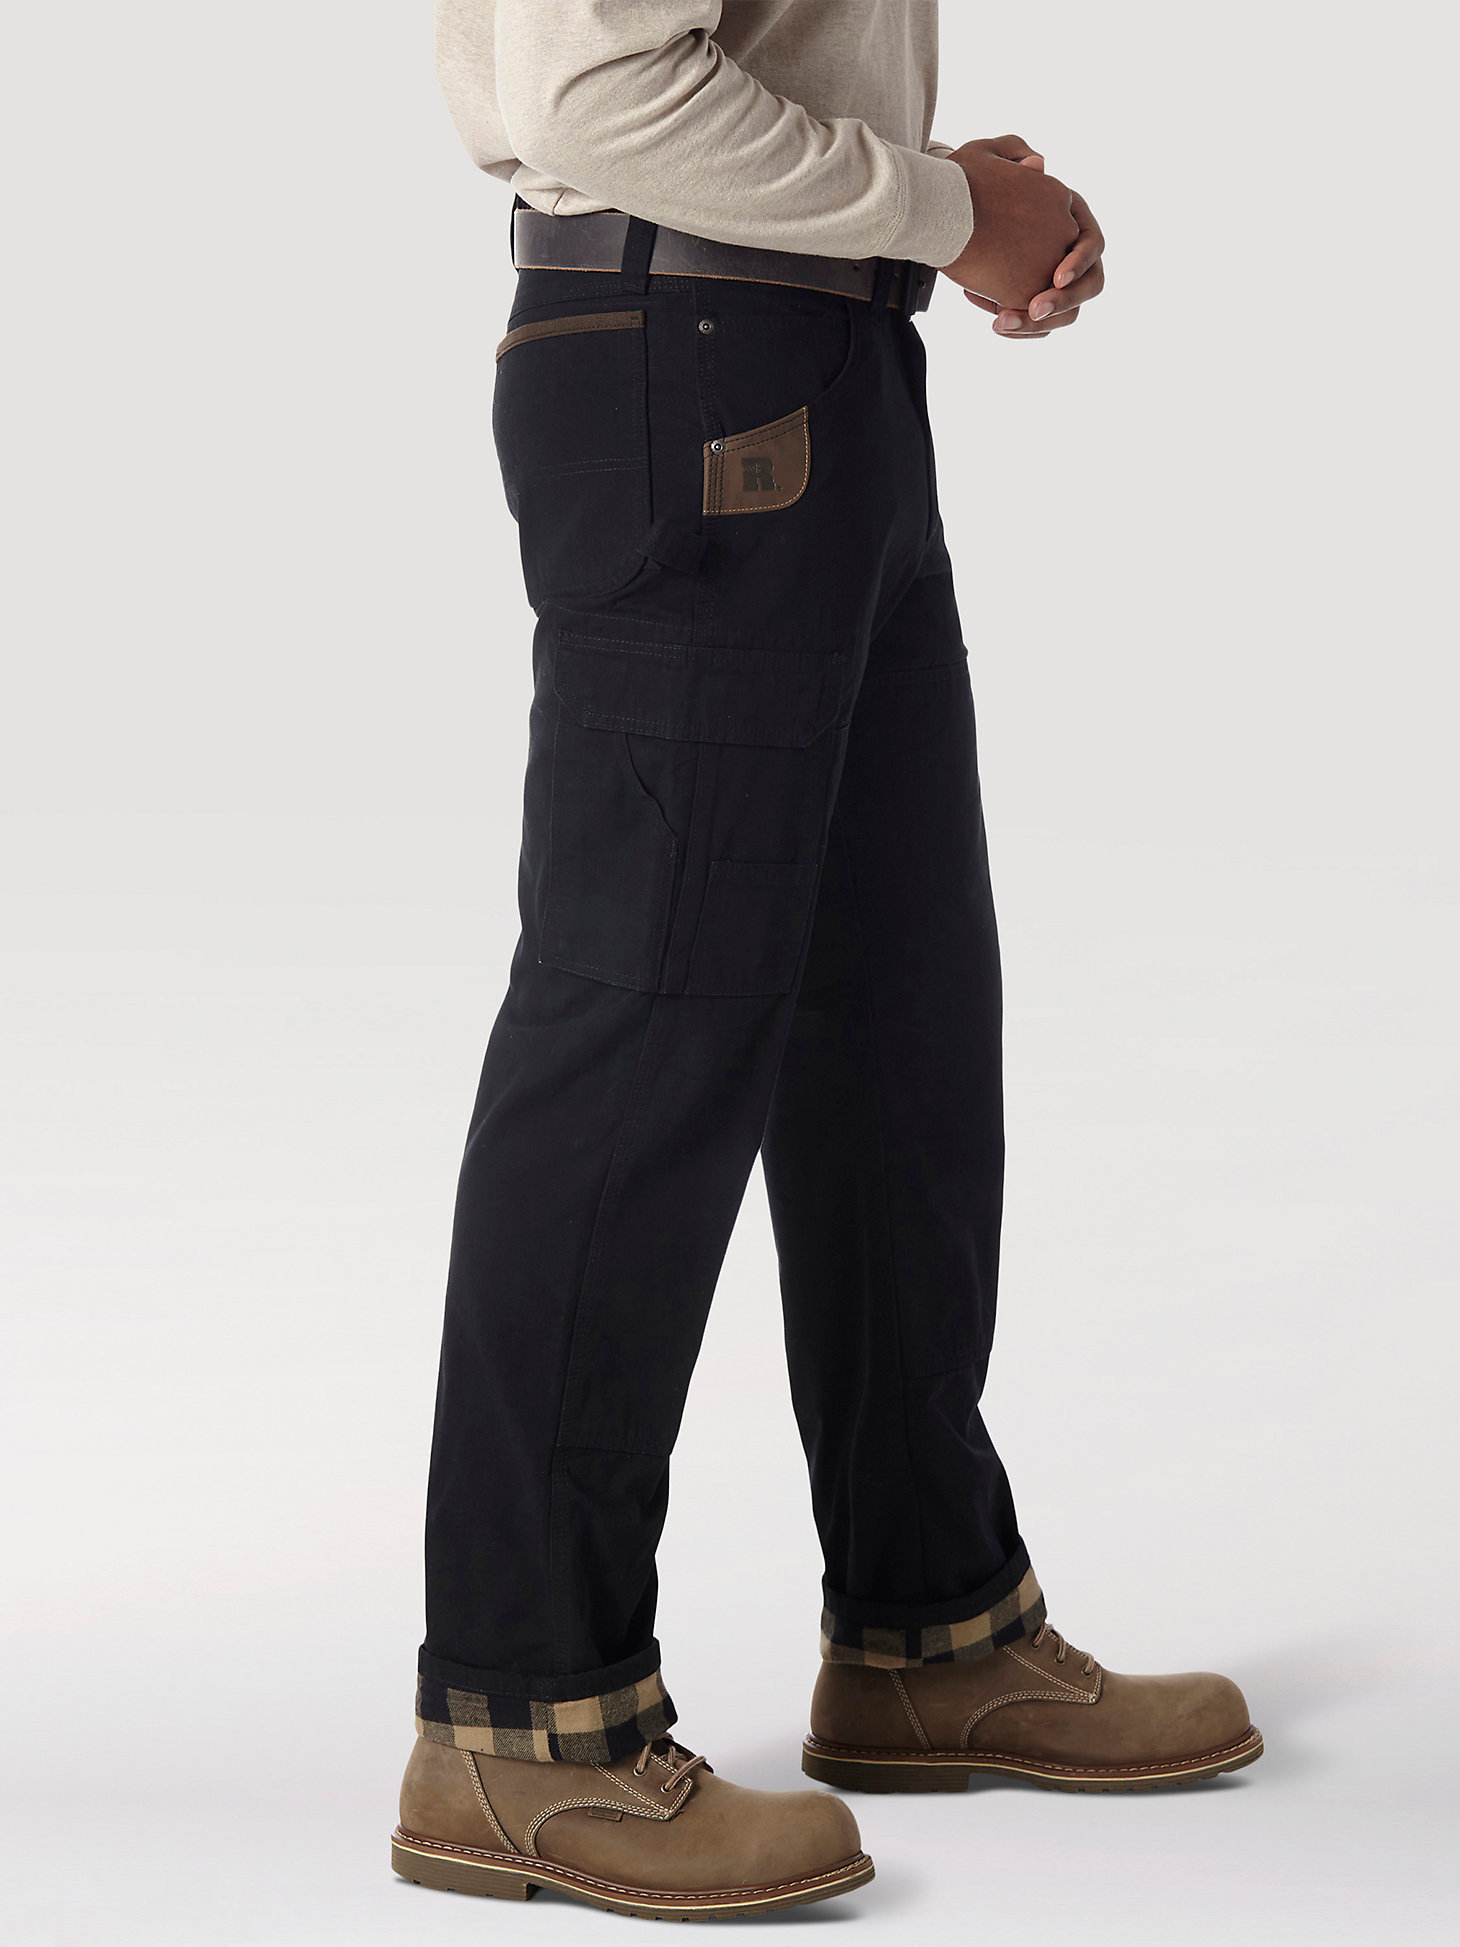 Wrangler RIGGS WORKWEAR® Lined Ripstop Ranger Pant in Black alternative view 1